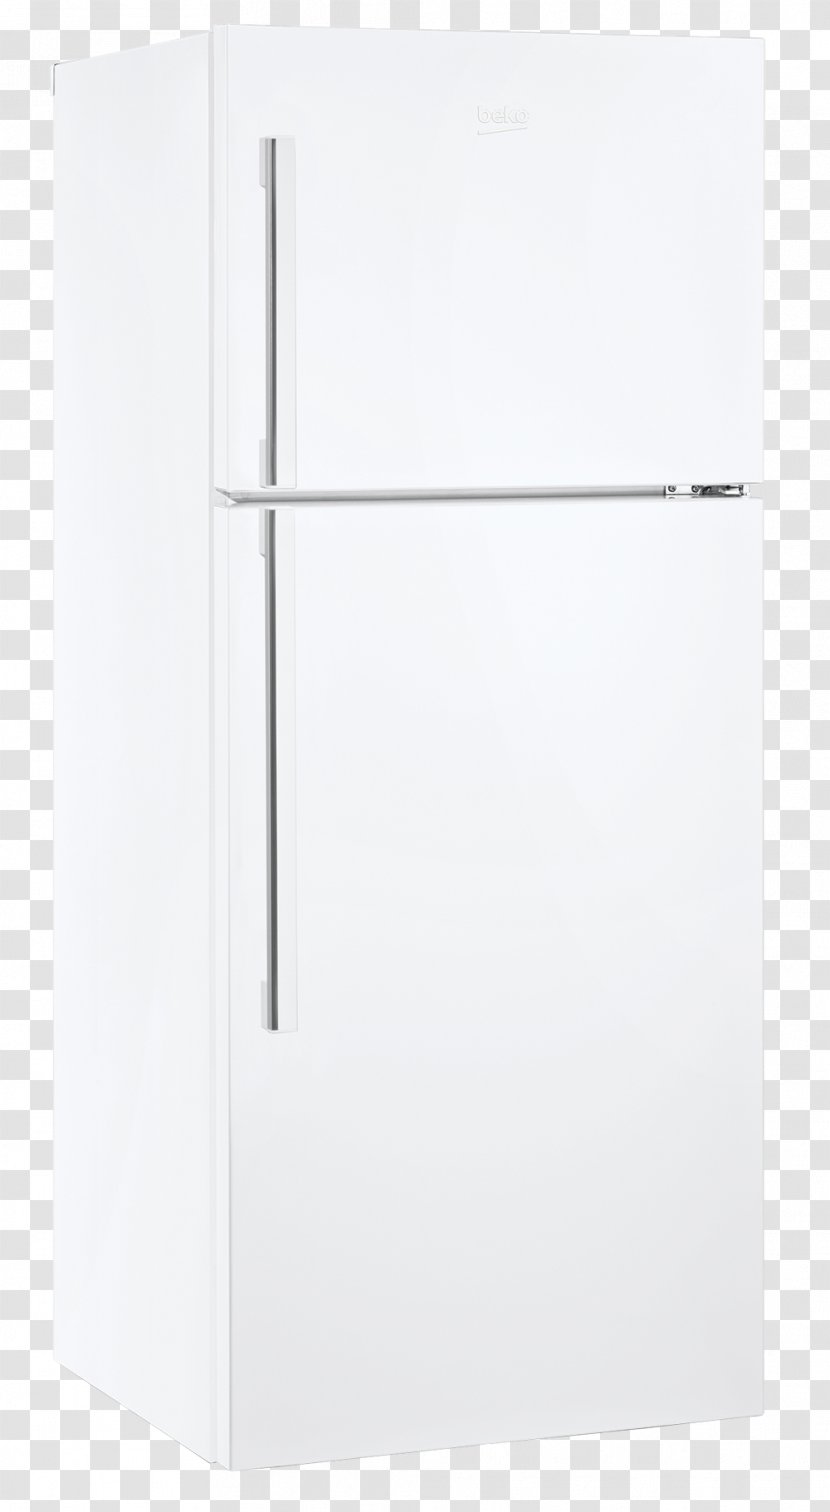 Refrigerator Auto-defrost Home Appliance Drawer Refrigeration - Cimri - Double Door Transparent PNG